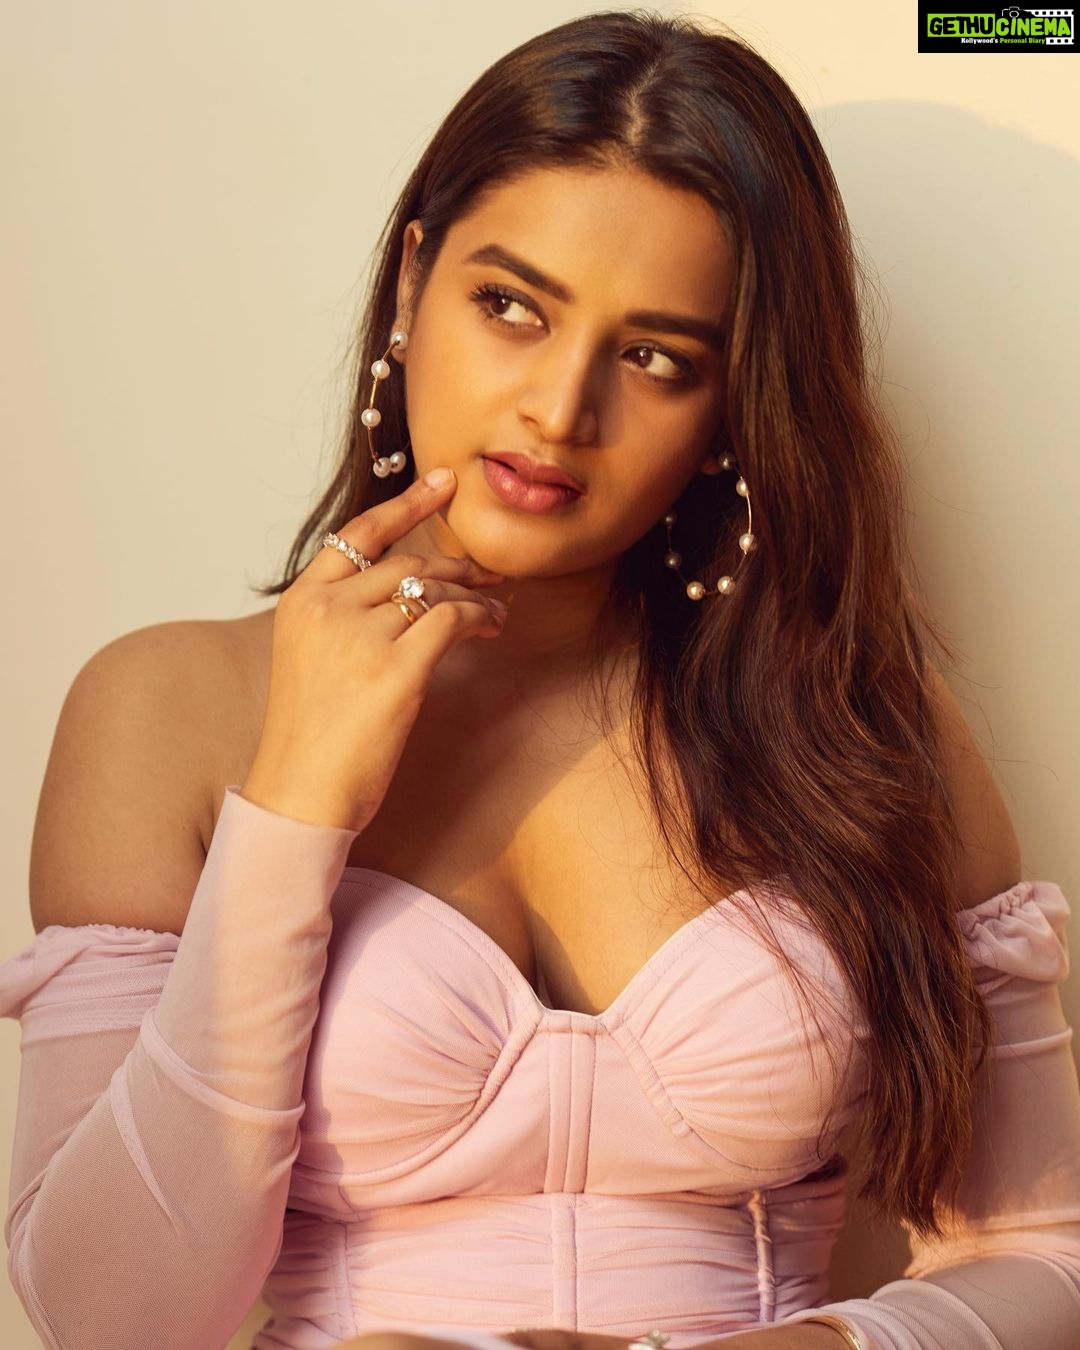 Nidhhi Agerwal - 1 Million Likes - Most Liked Instagram Photos